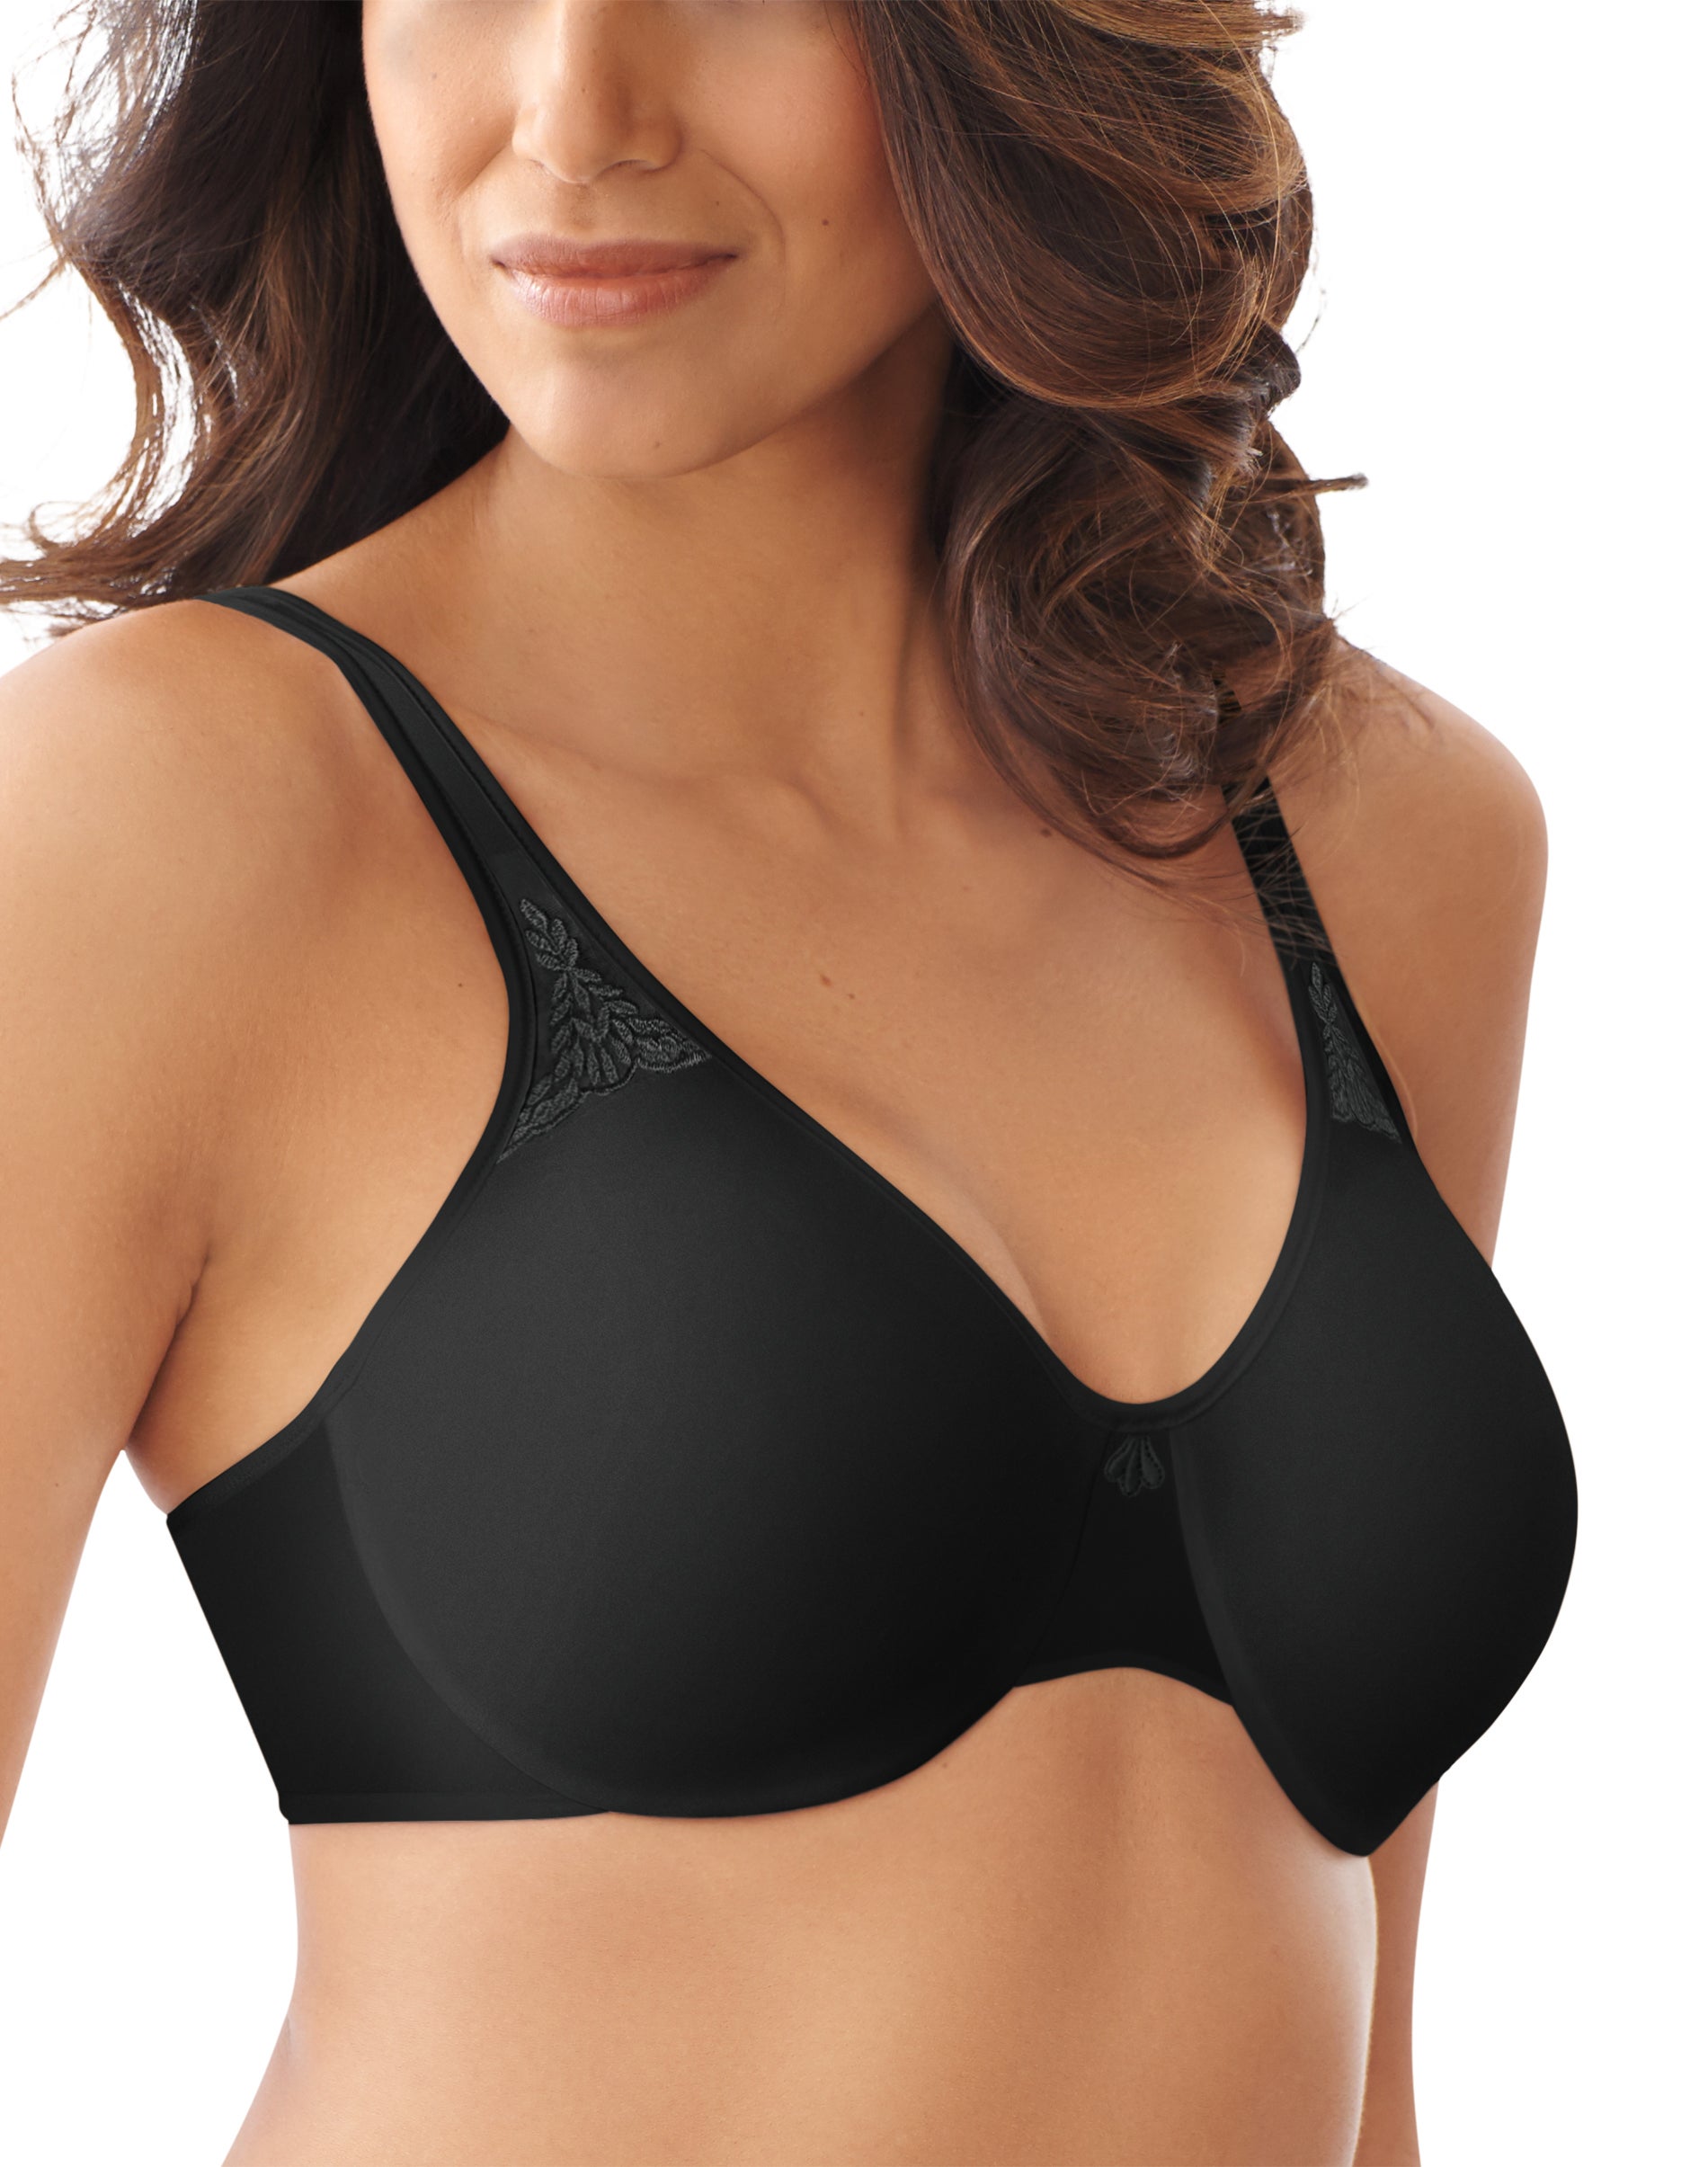 adviicd Balconette Bras For Women 20-Hour Lift Wireless Bra, Wirefree Bra  with Support, Full-Coverage Wireless Bra for Everyday Comfort Black 9X-Large